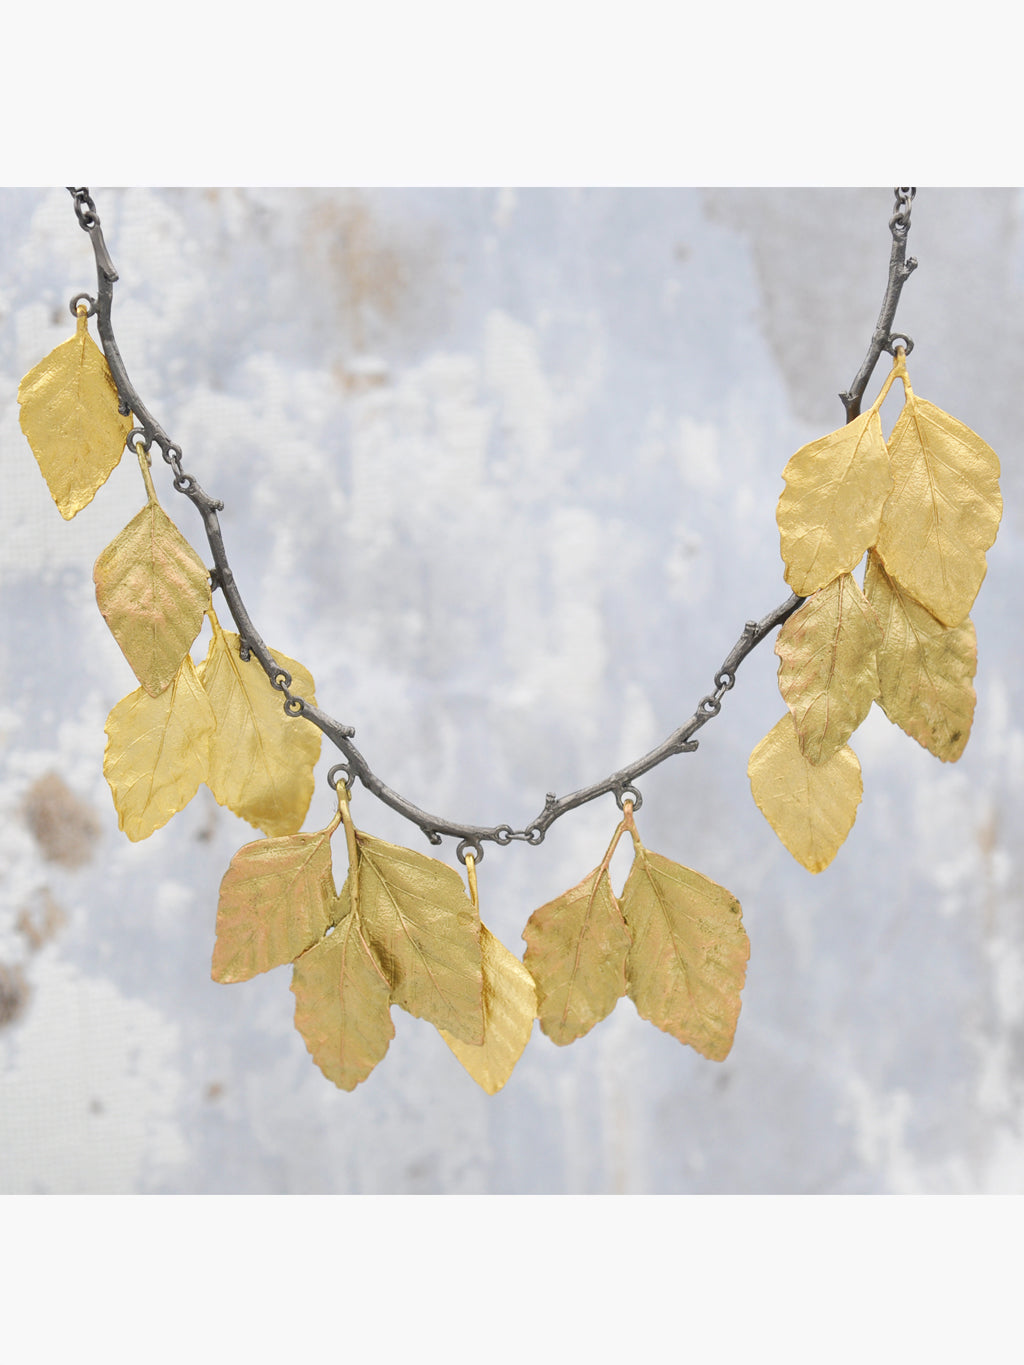 Cascading Autumn Leaves Necklace